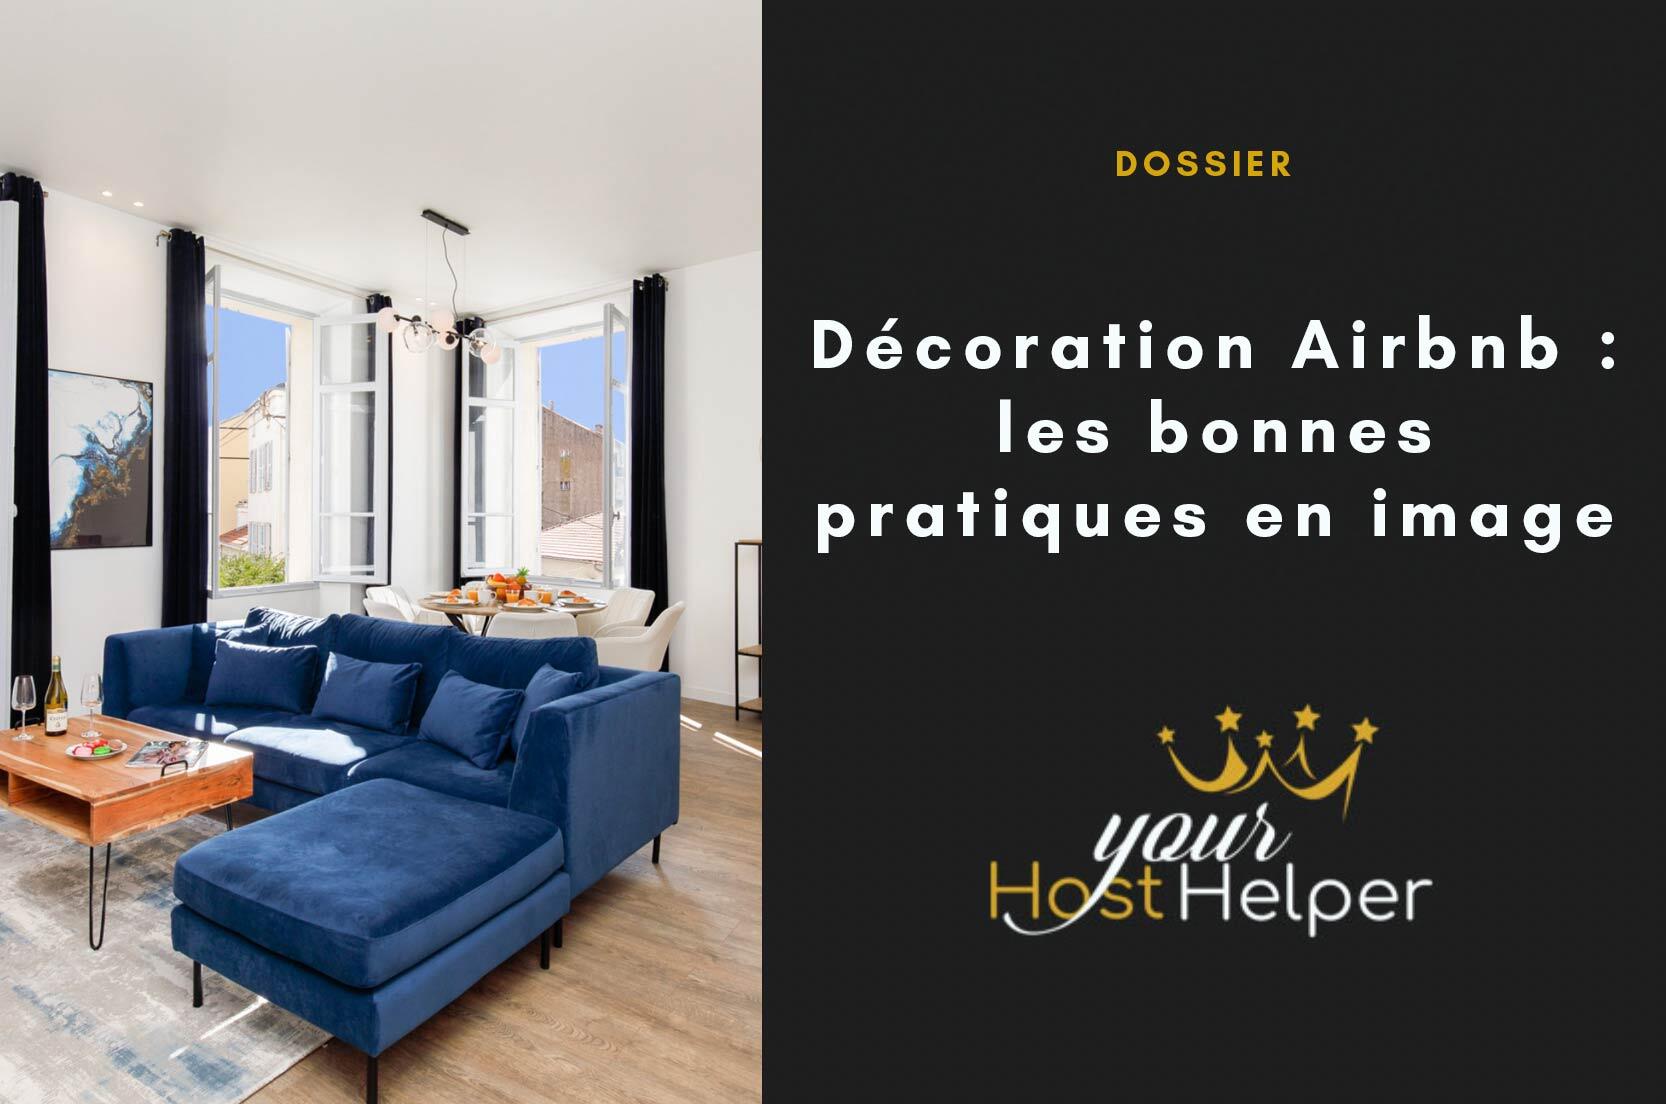 You are currently viewing Airbnb decoration: image best practices